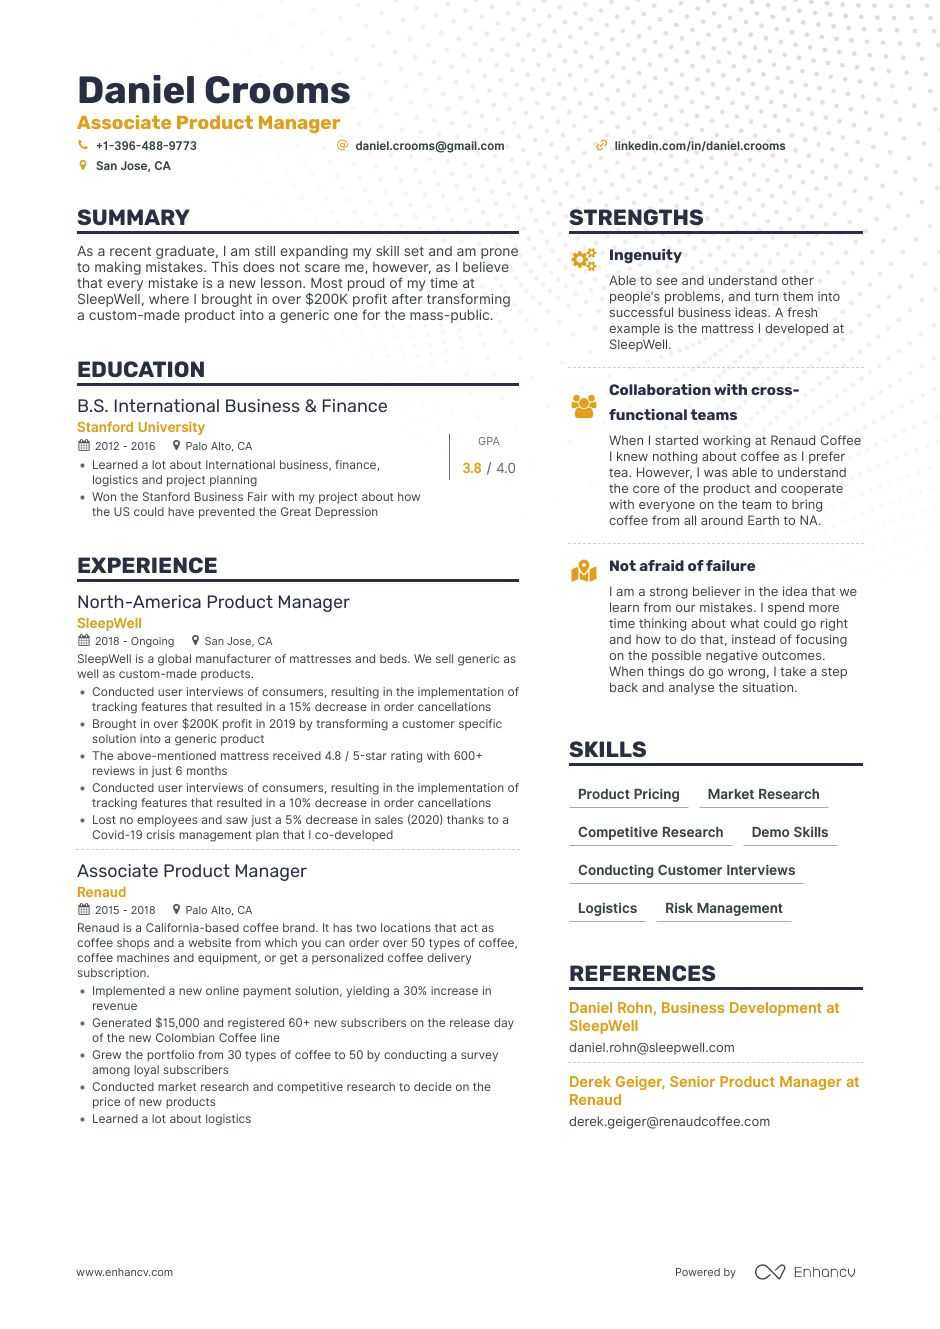 Product Management Sample Product Manager Resume Product Manager Resume Examples & Guide for 2022 (layout, Skills …